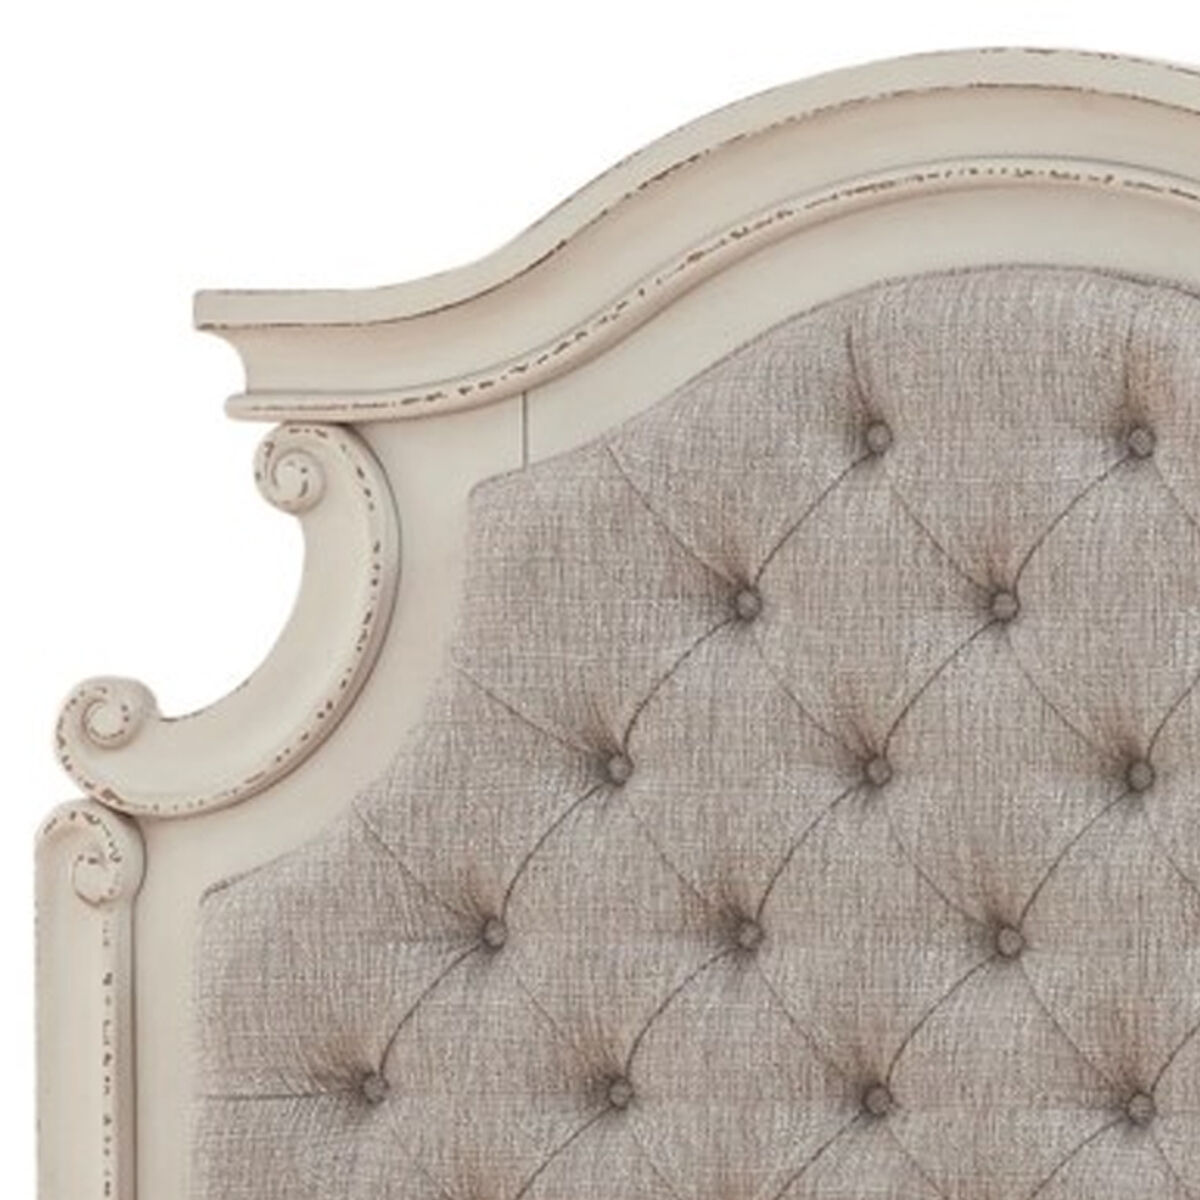 Scalloped Fabric Upholstered Full Size Panel Headboard, Gray and Cream